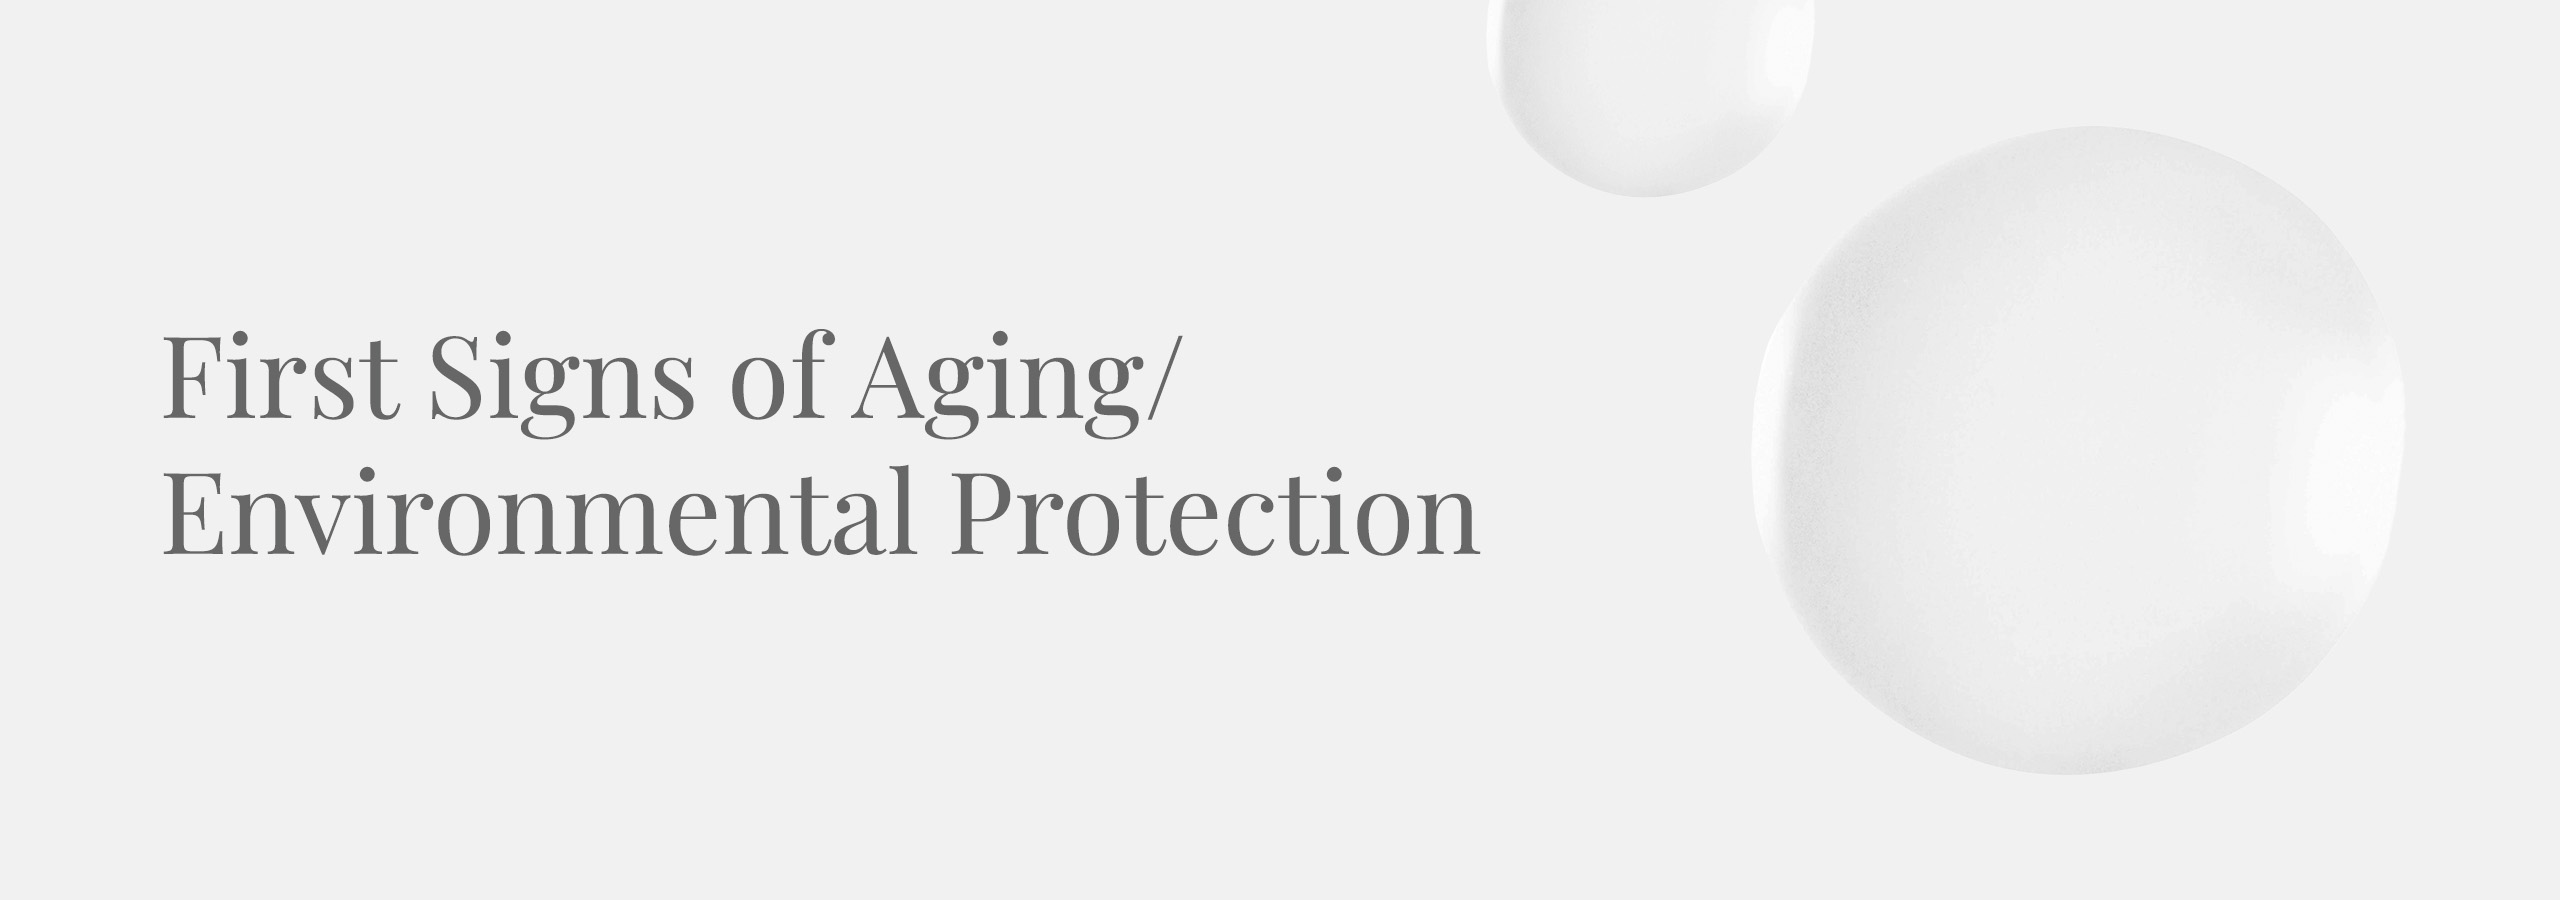 First Signs Of Aging Environmental Protection Desktop